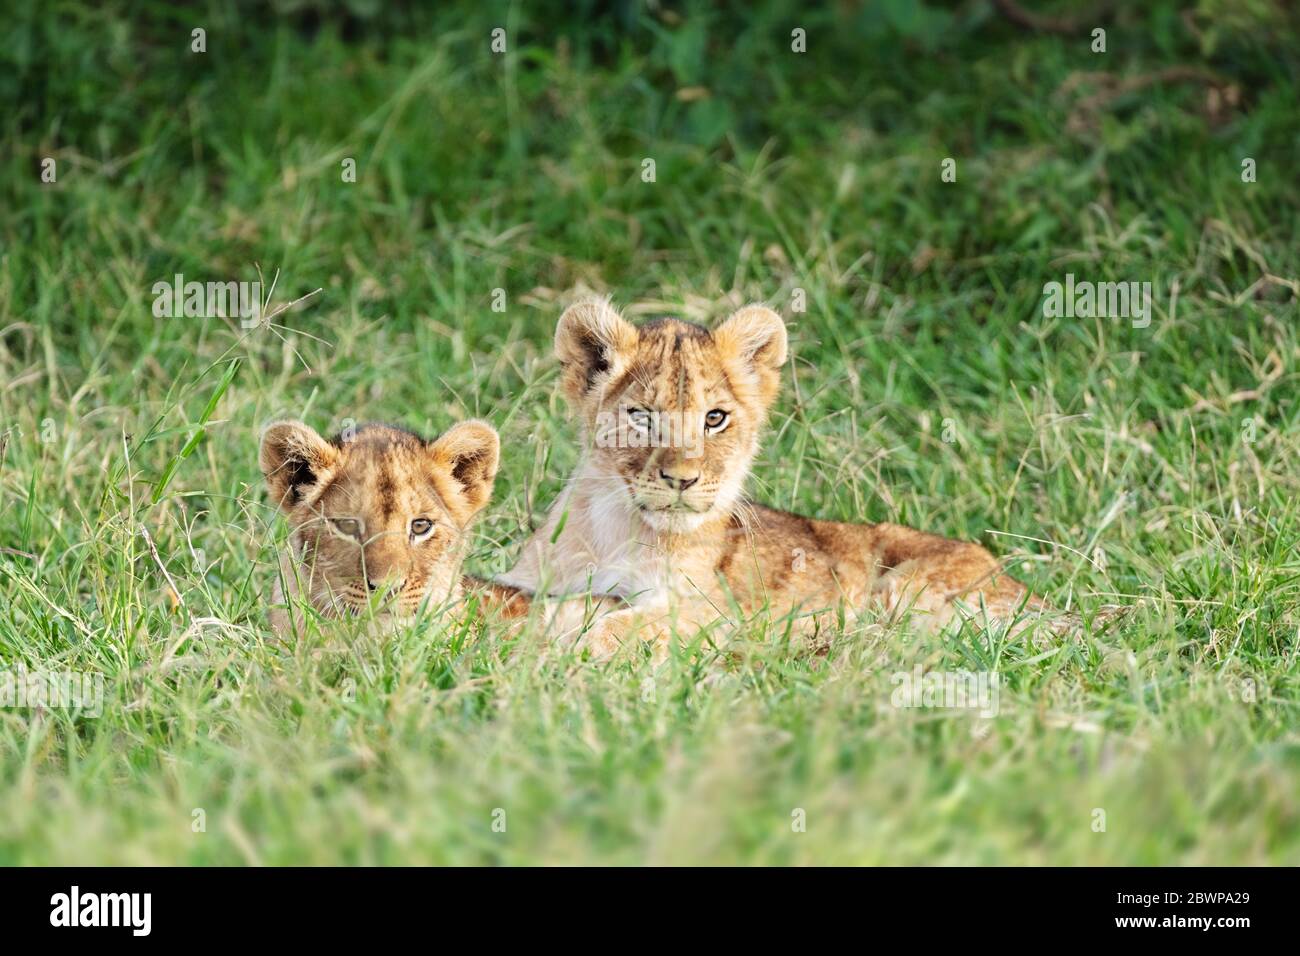 Two cute lion cubs lying together in grasslands of Kenya, Africa Stock Photo